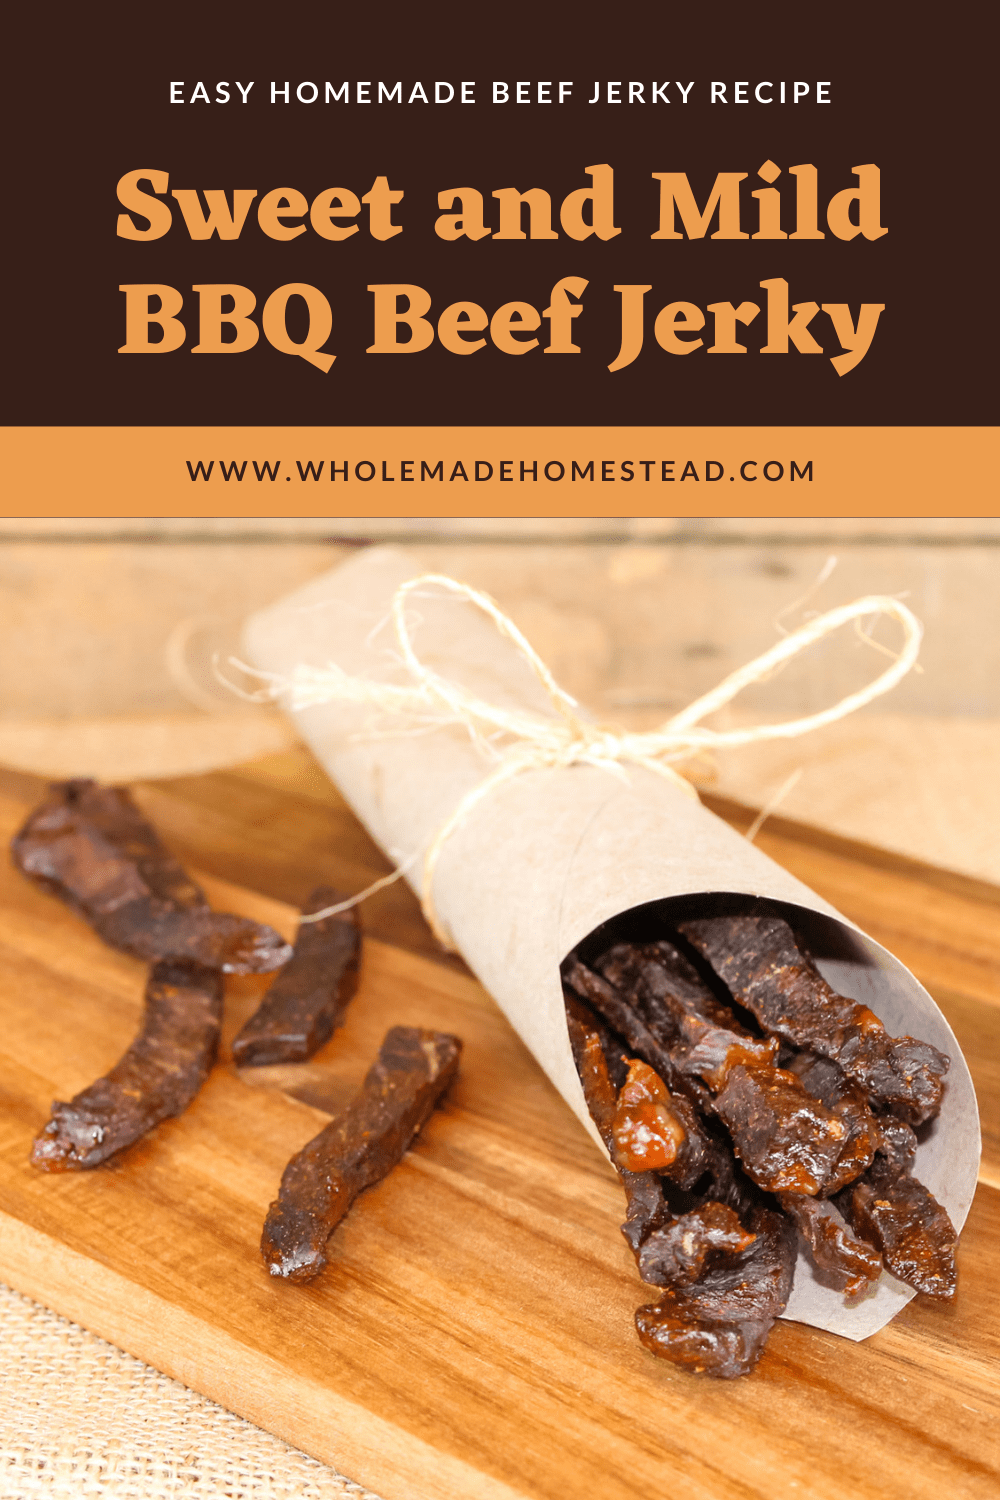 Homemade All Natural Beef Jerky - No dehydrator required